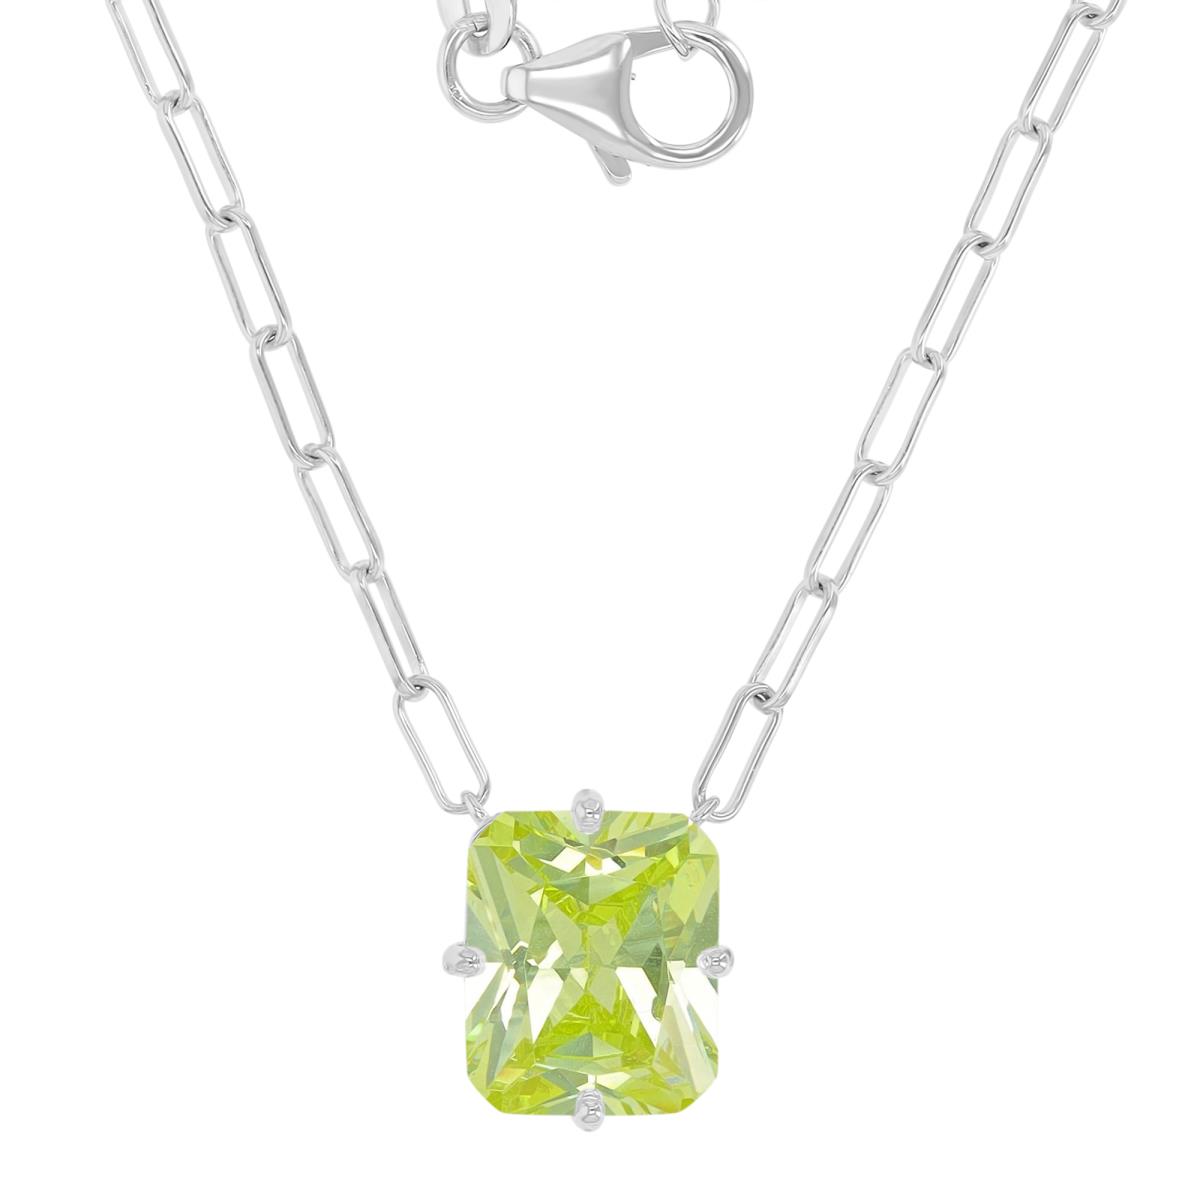 Sterling Silver Rhodium 10x12mm Radiant Cut Canary Yellow CZ Paperclip Chain 18+2" Necklace